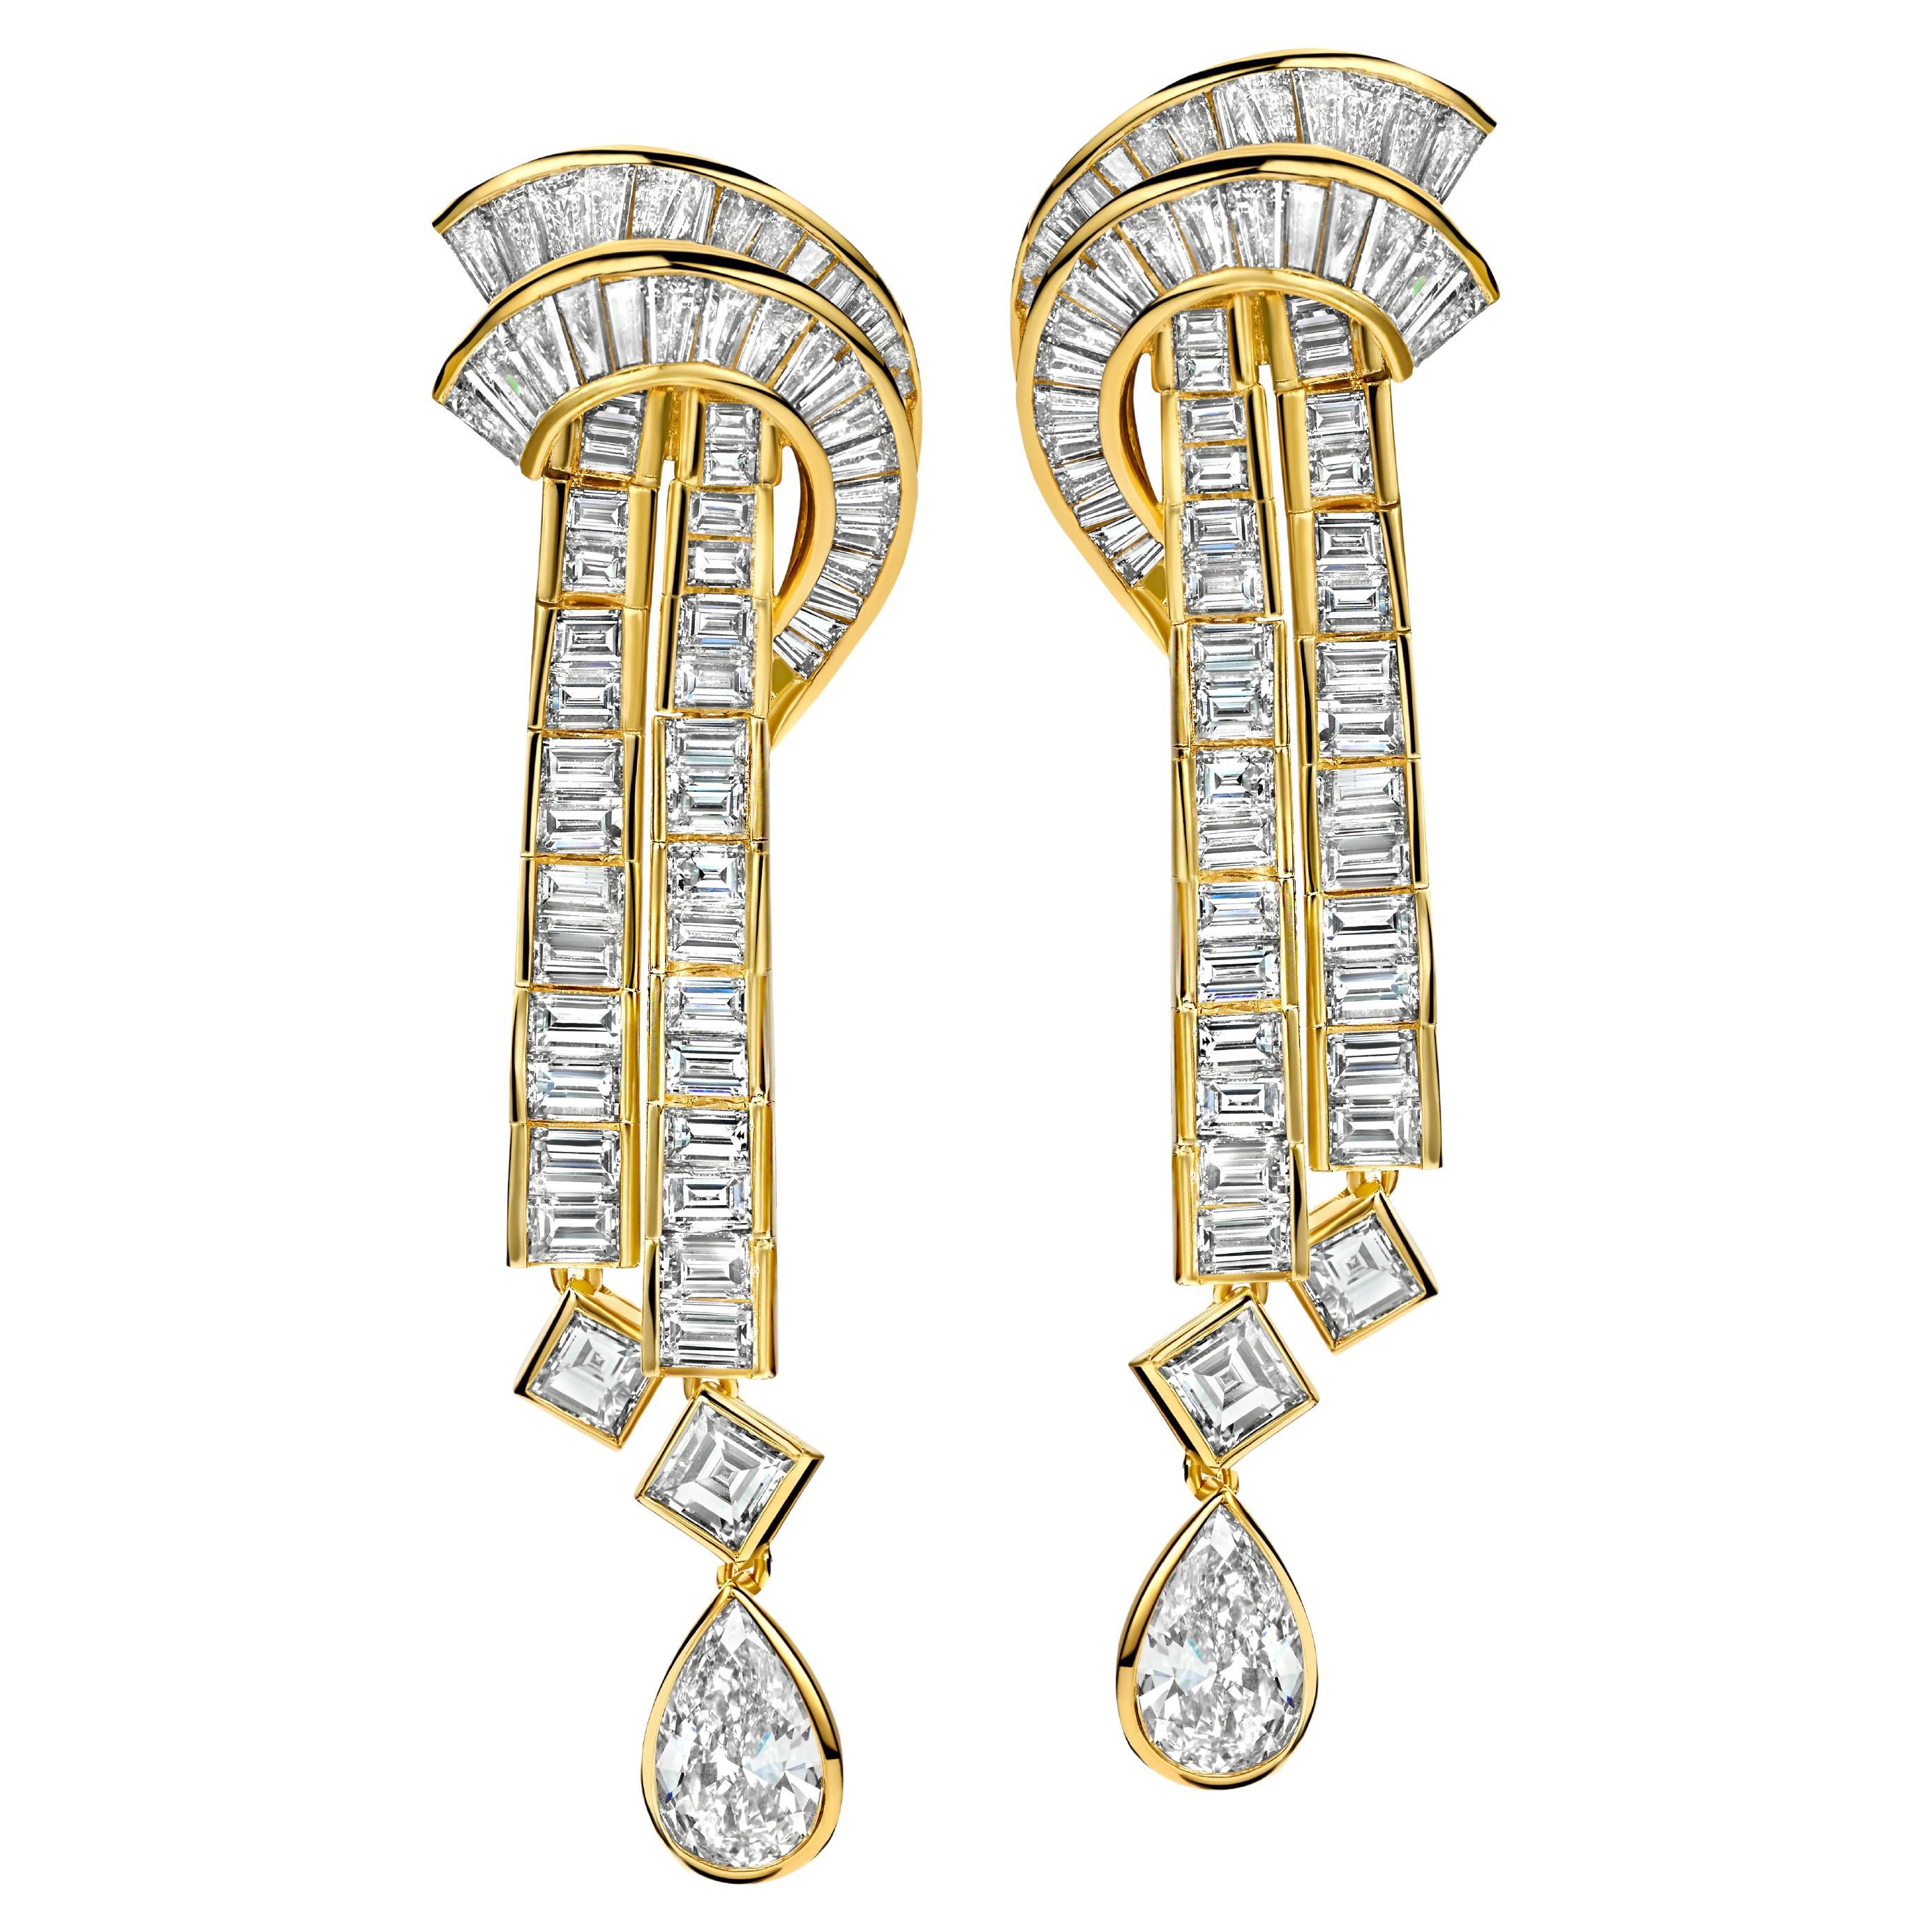 18kt Yellow Gold Earrings 3ct Pear, 7.6ct Baguette, 1.2ct Square Diamonds Estate